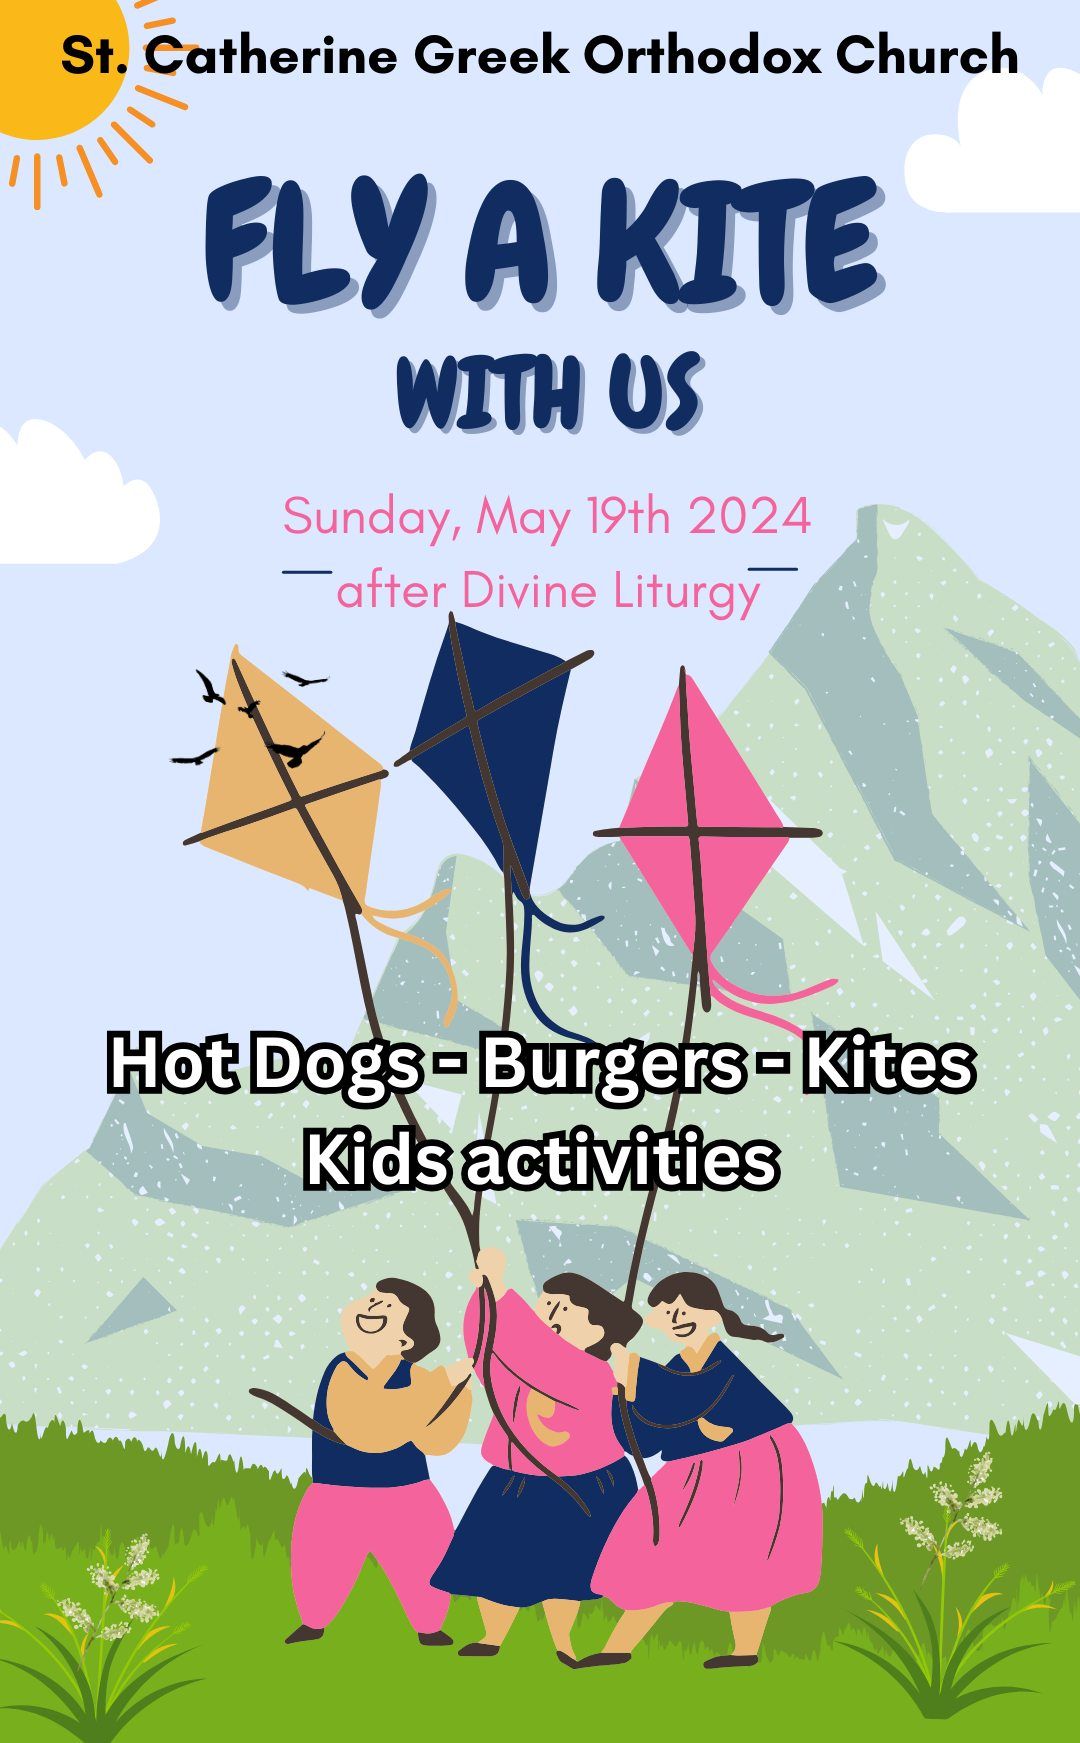 Fly a kite with us